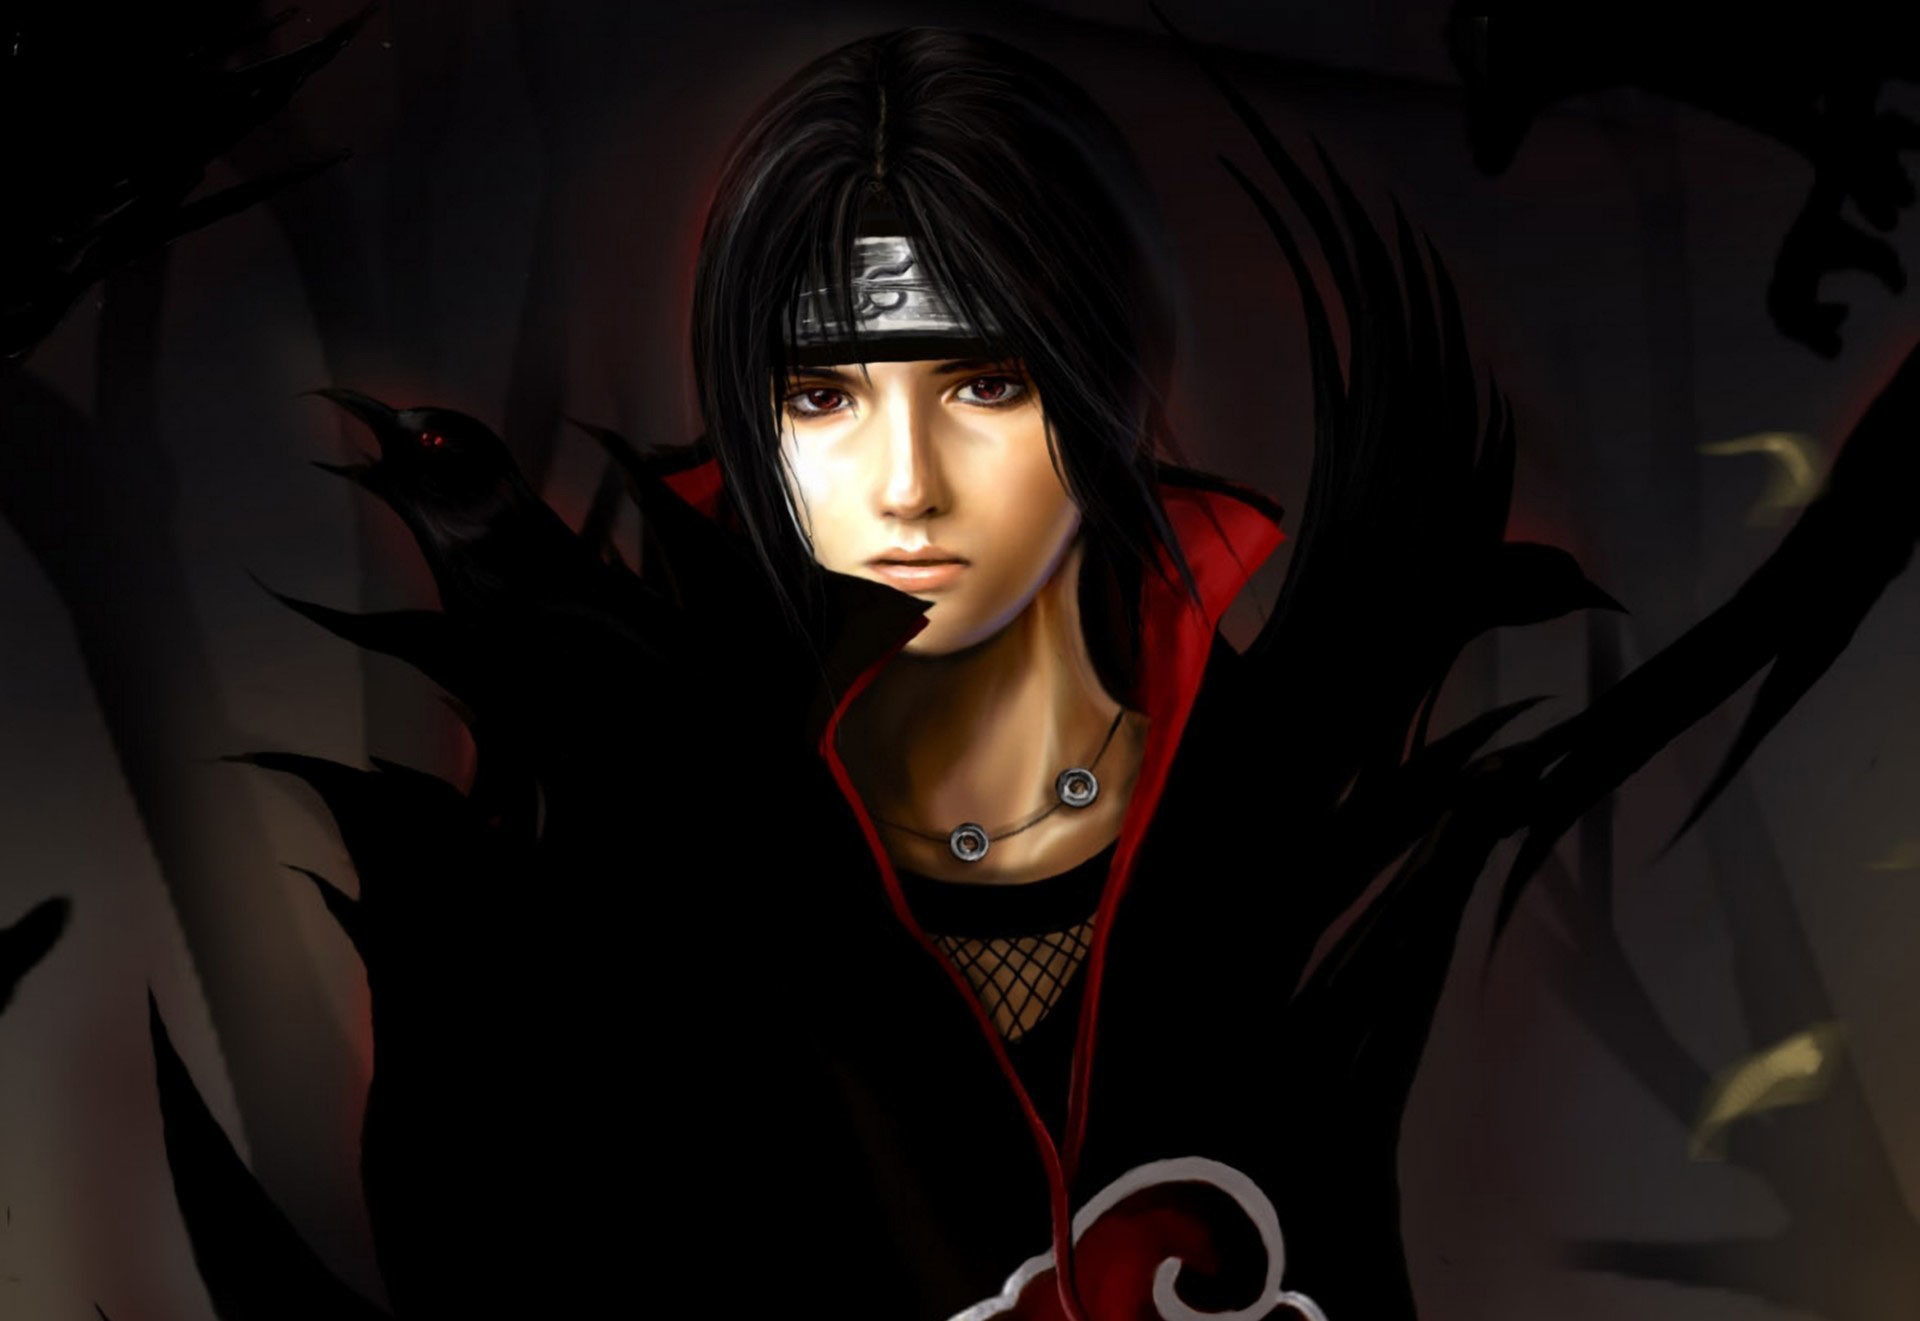 Naruto Shippuden Itachi HD Wallpapers in HD with resolutions 19201321 px